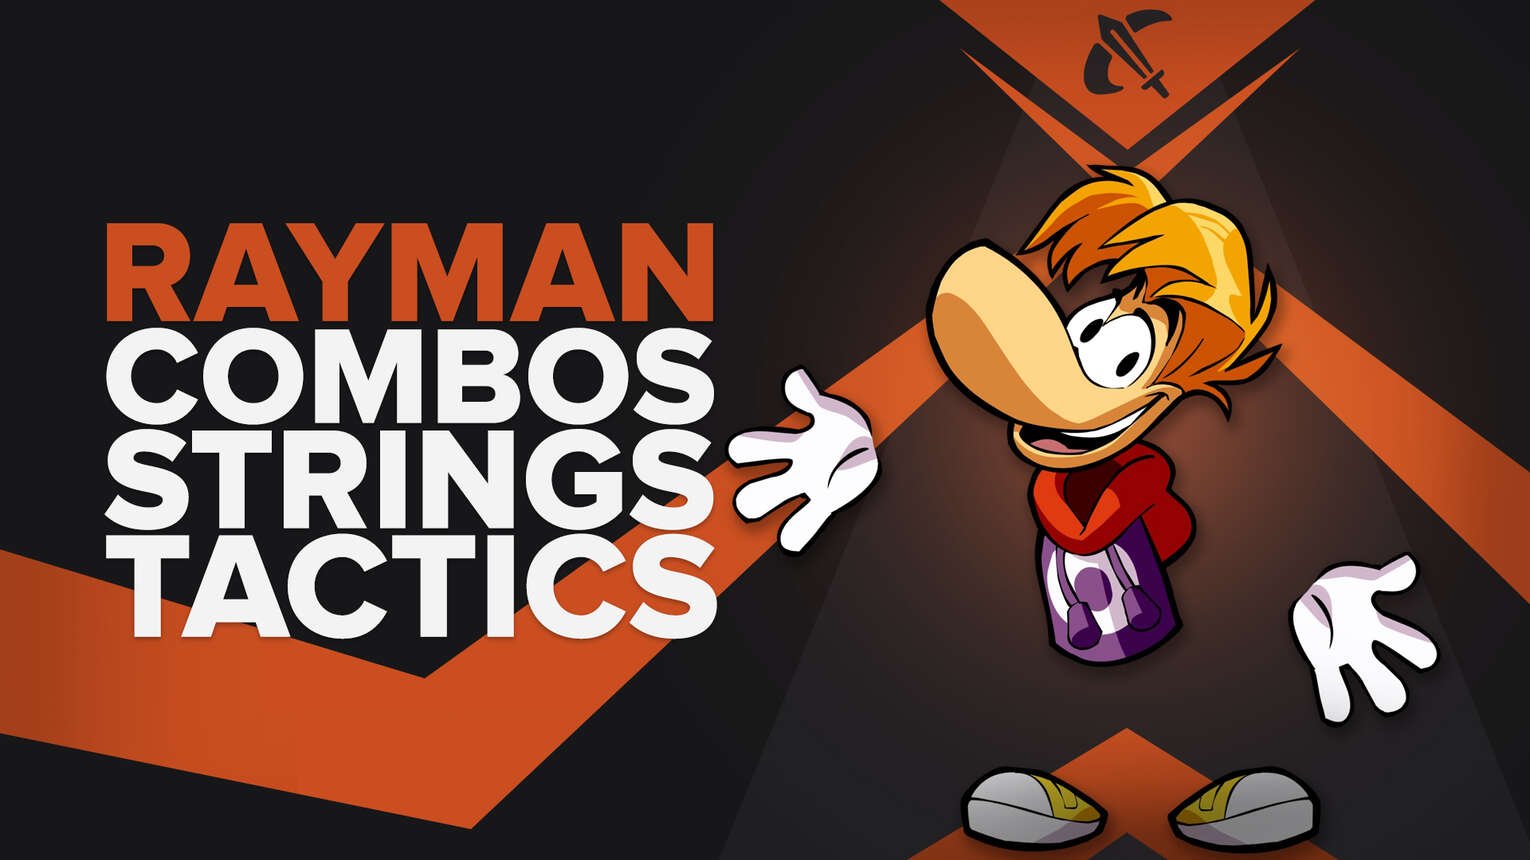 Best Rayman combos, strings, and combat tactics in Brawlhalla